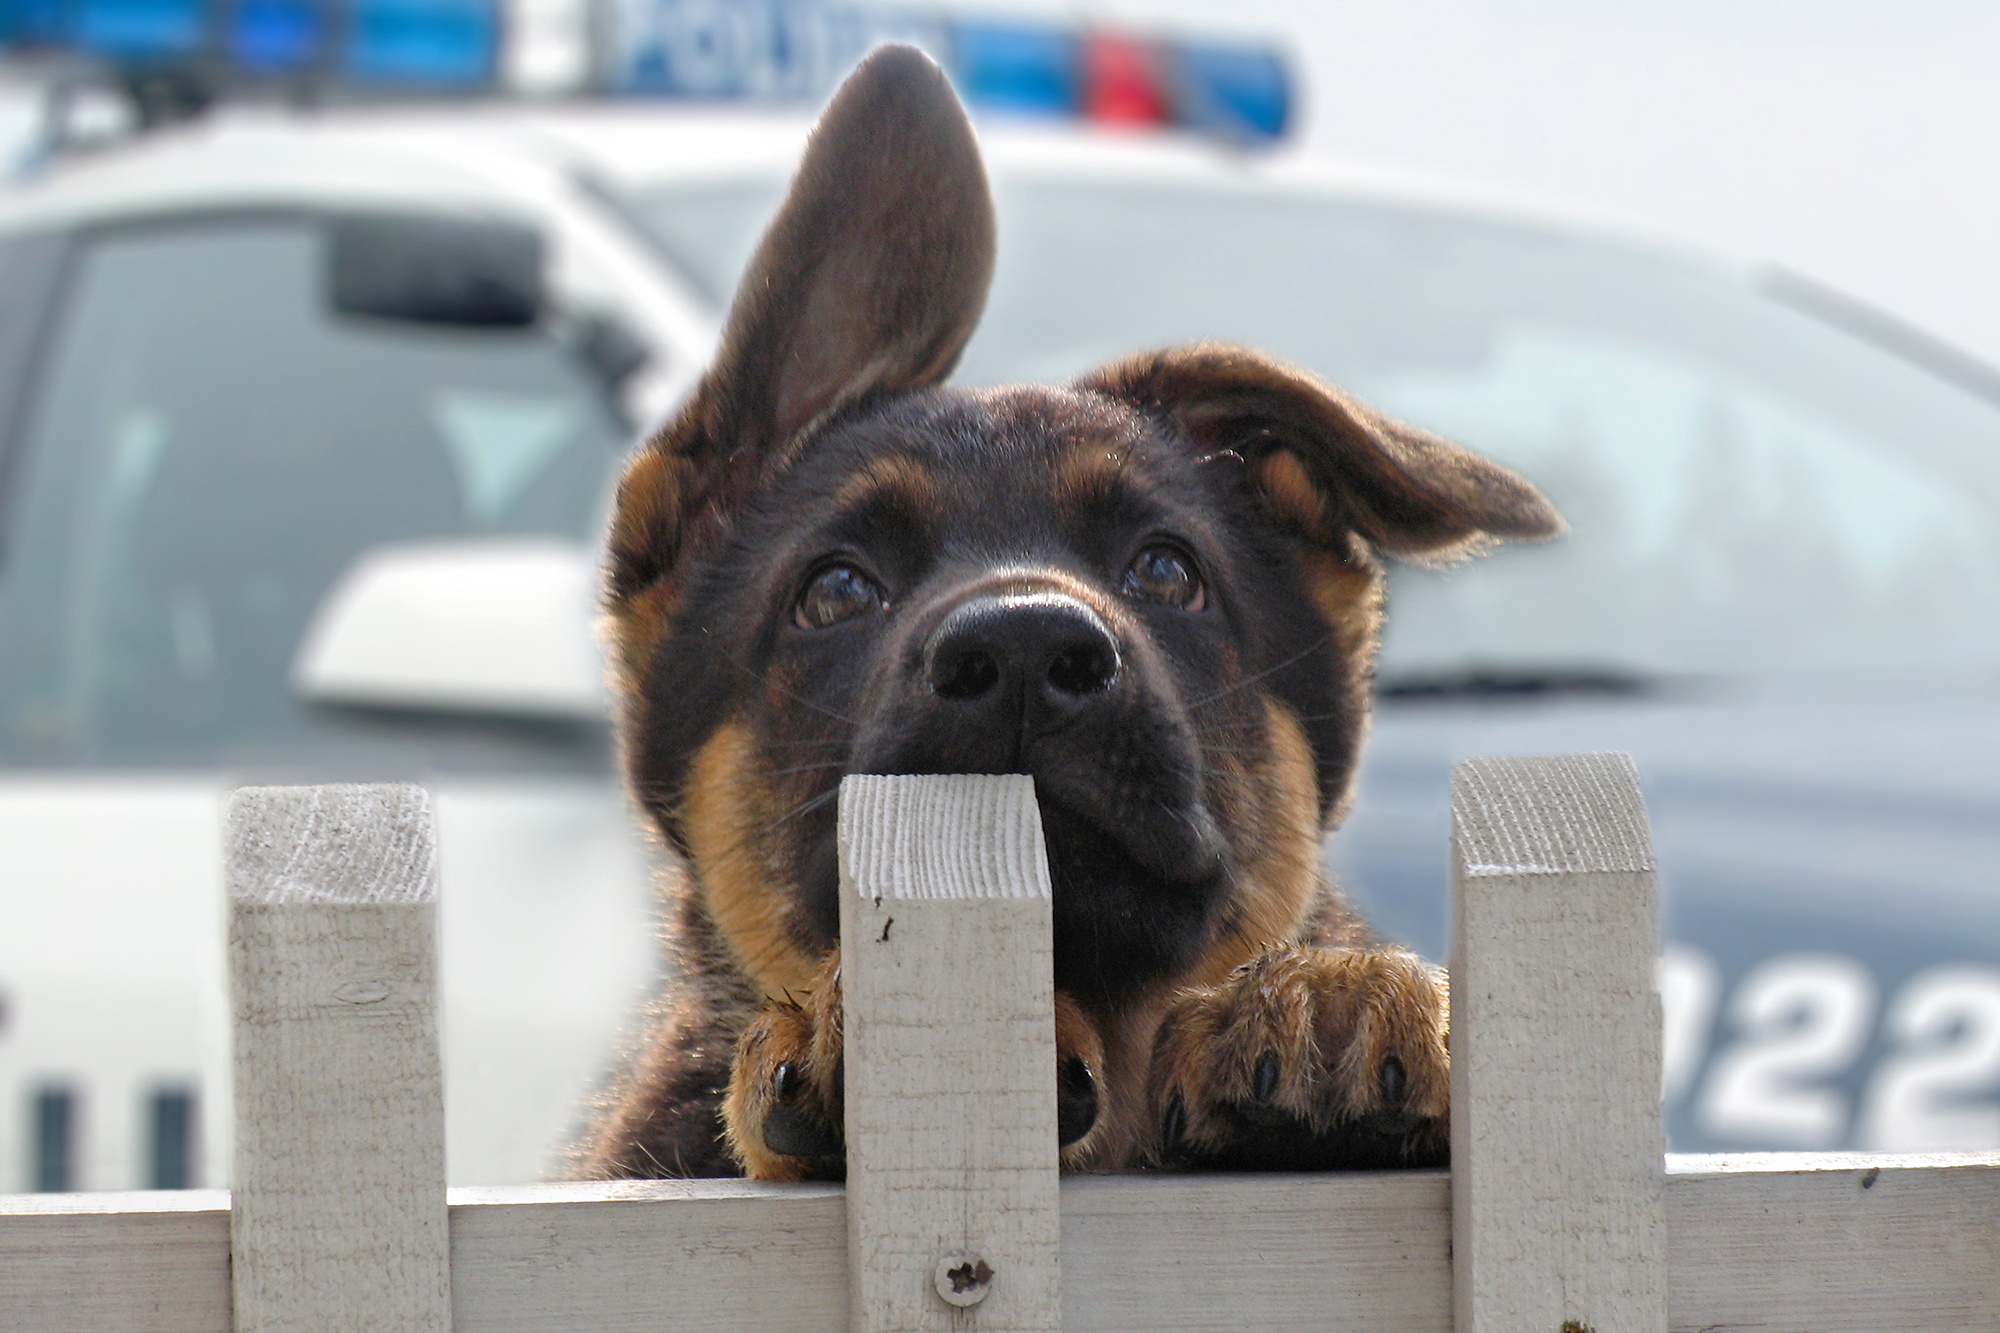 A puppy peaking over a wooden fence with a police car in the background.